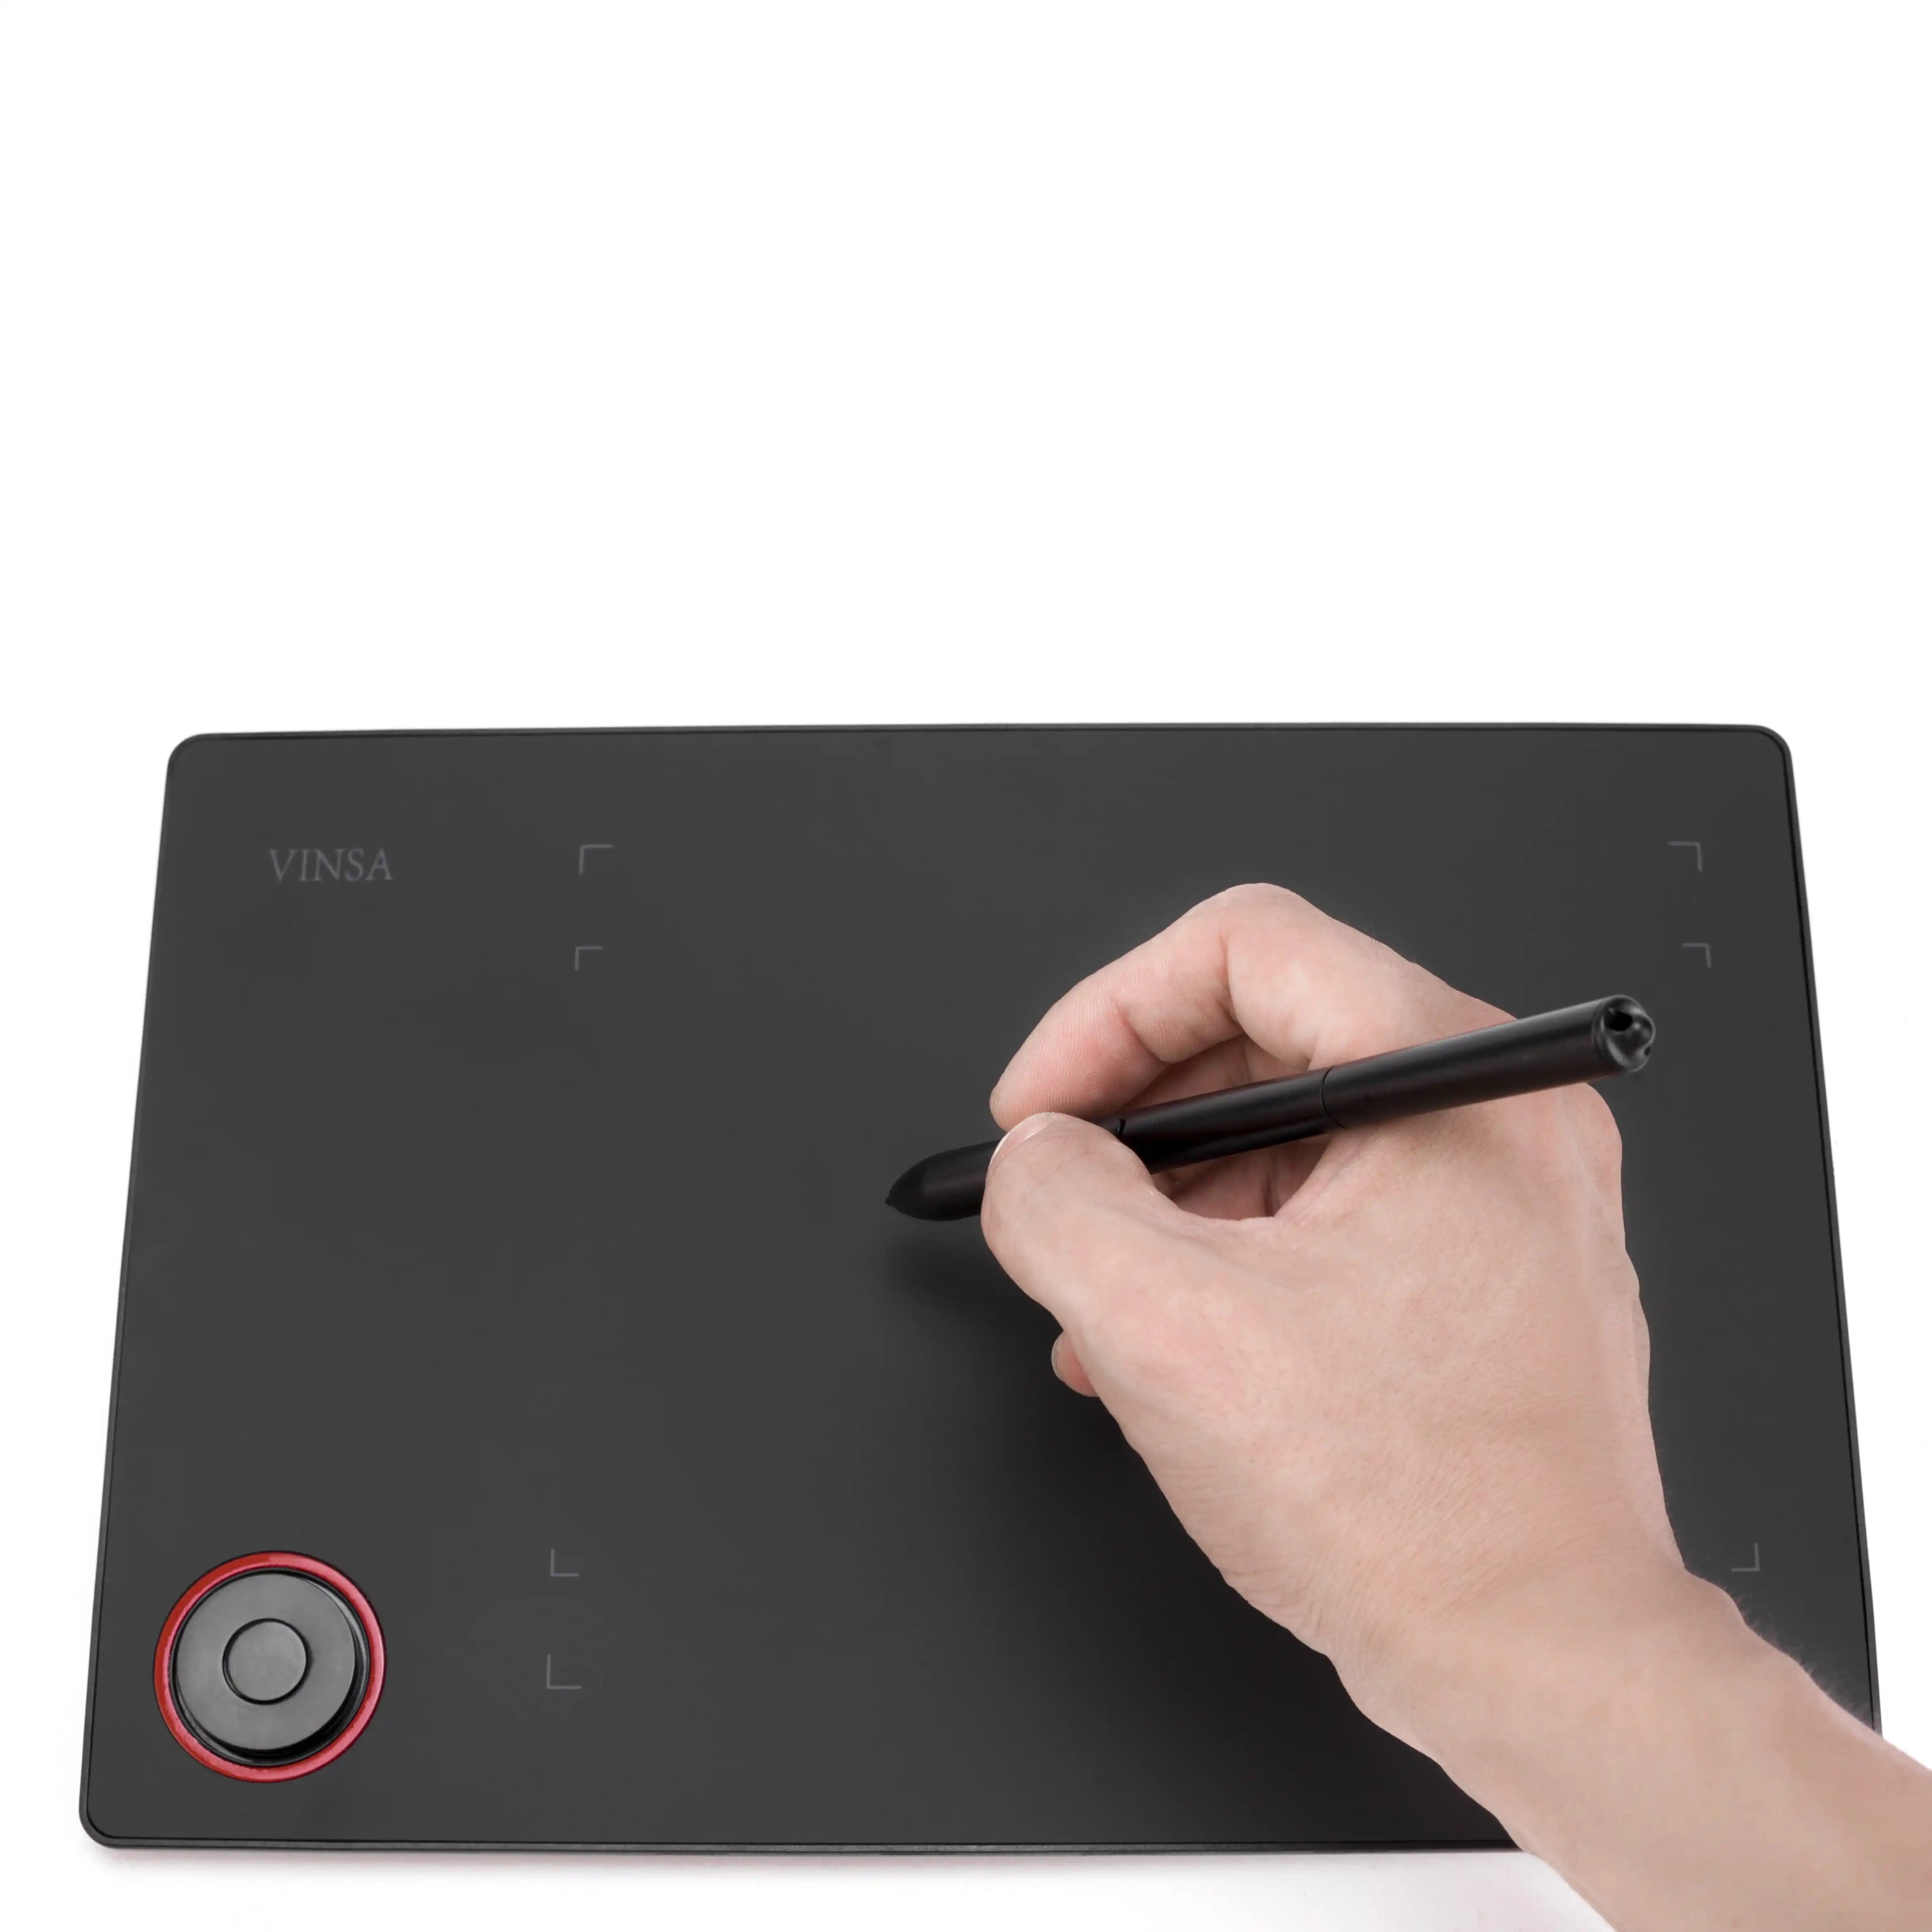 VINSA T608 Smart drawing tablet 8192 levels electronic battery free digital pen handwriting drawing graphic tablet